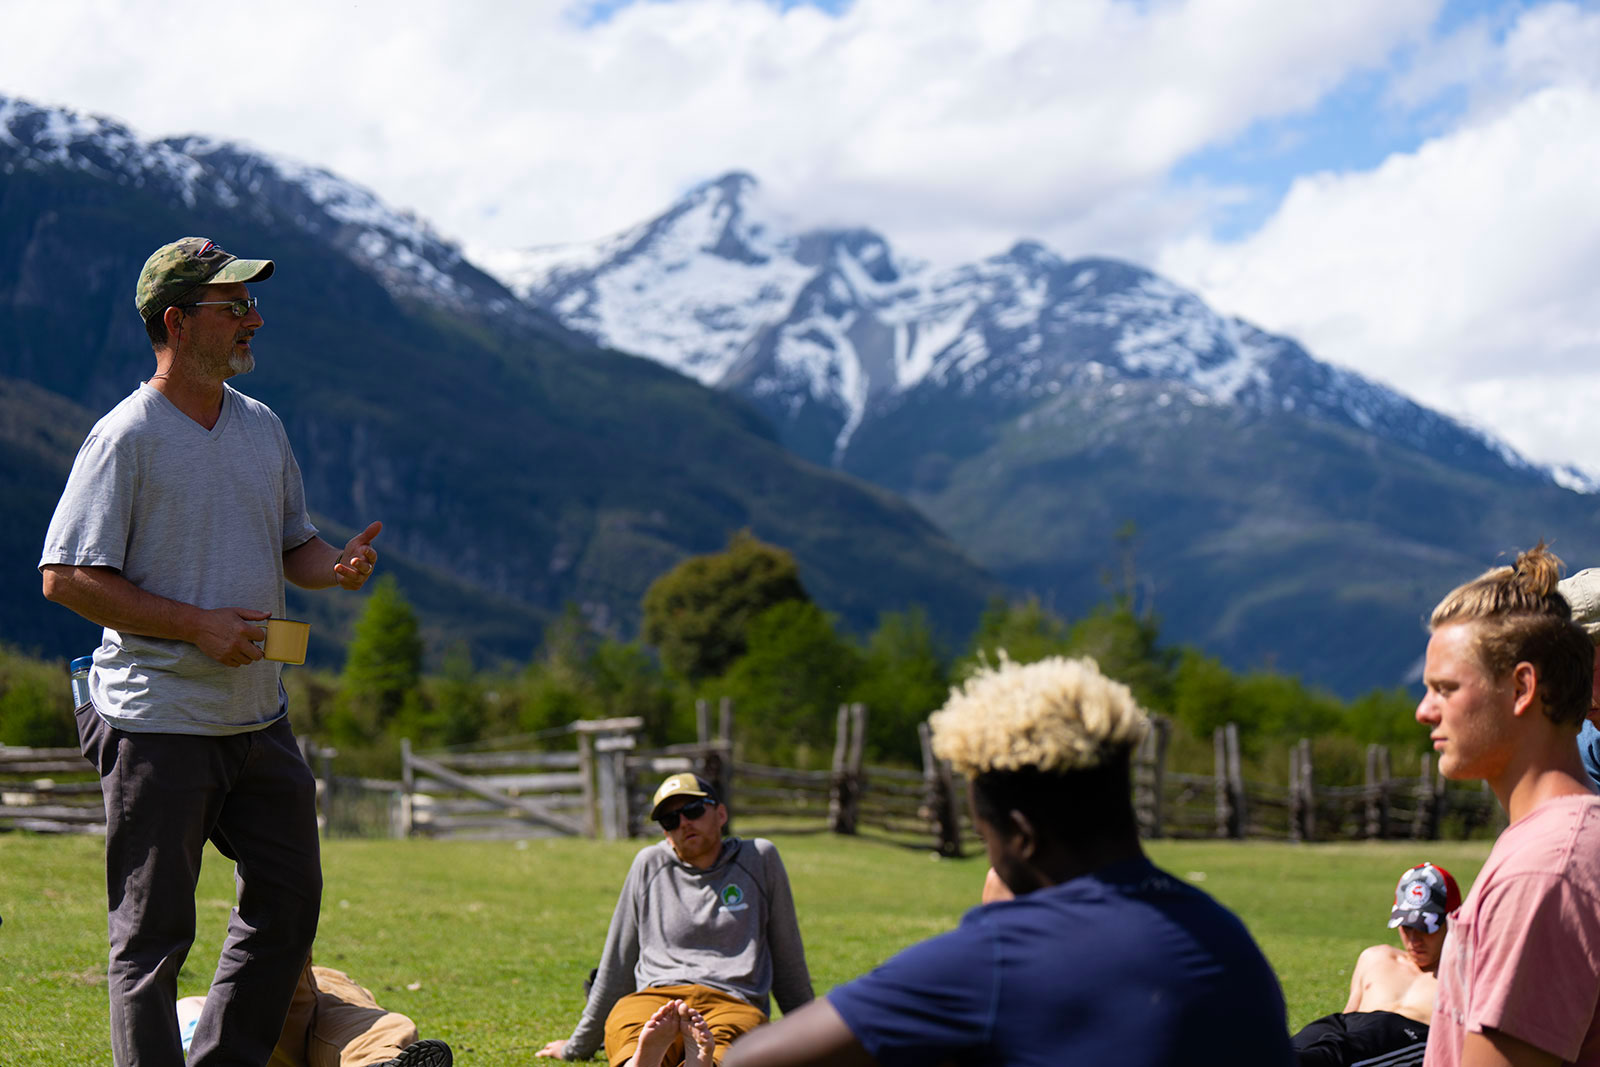 Patrick leads a group discussion about recovery outside in a picturesque Patagonia, Chile valley